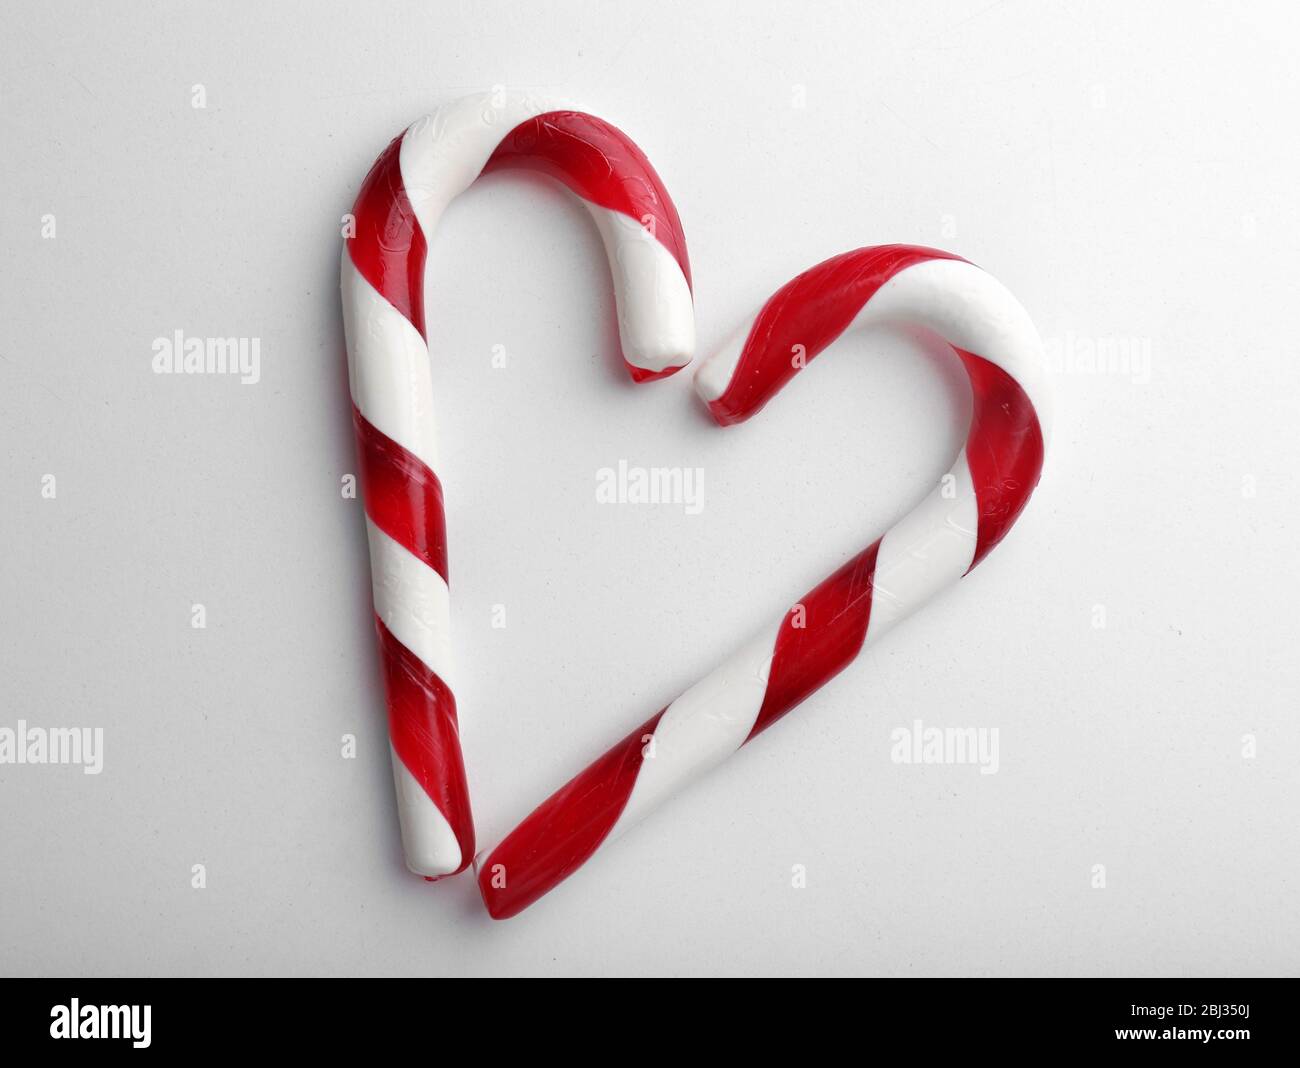 Christmas Candy Canes isolated on white Stock Photo - Alamy